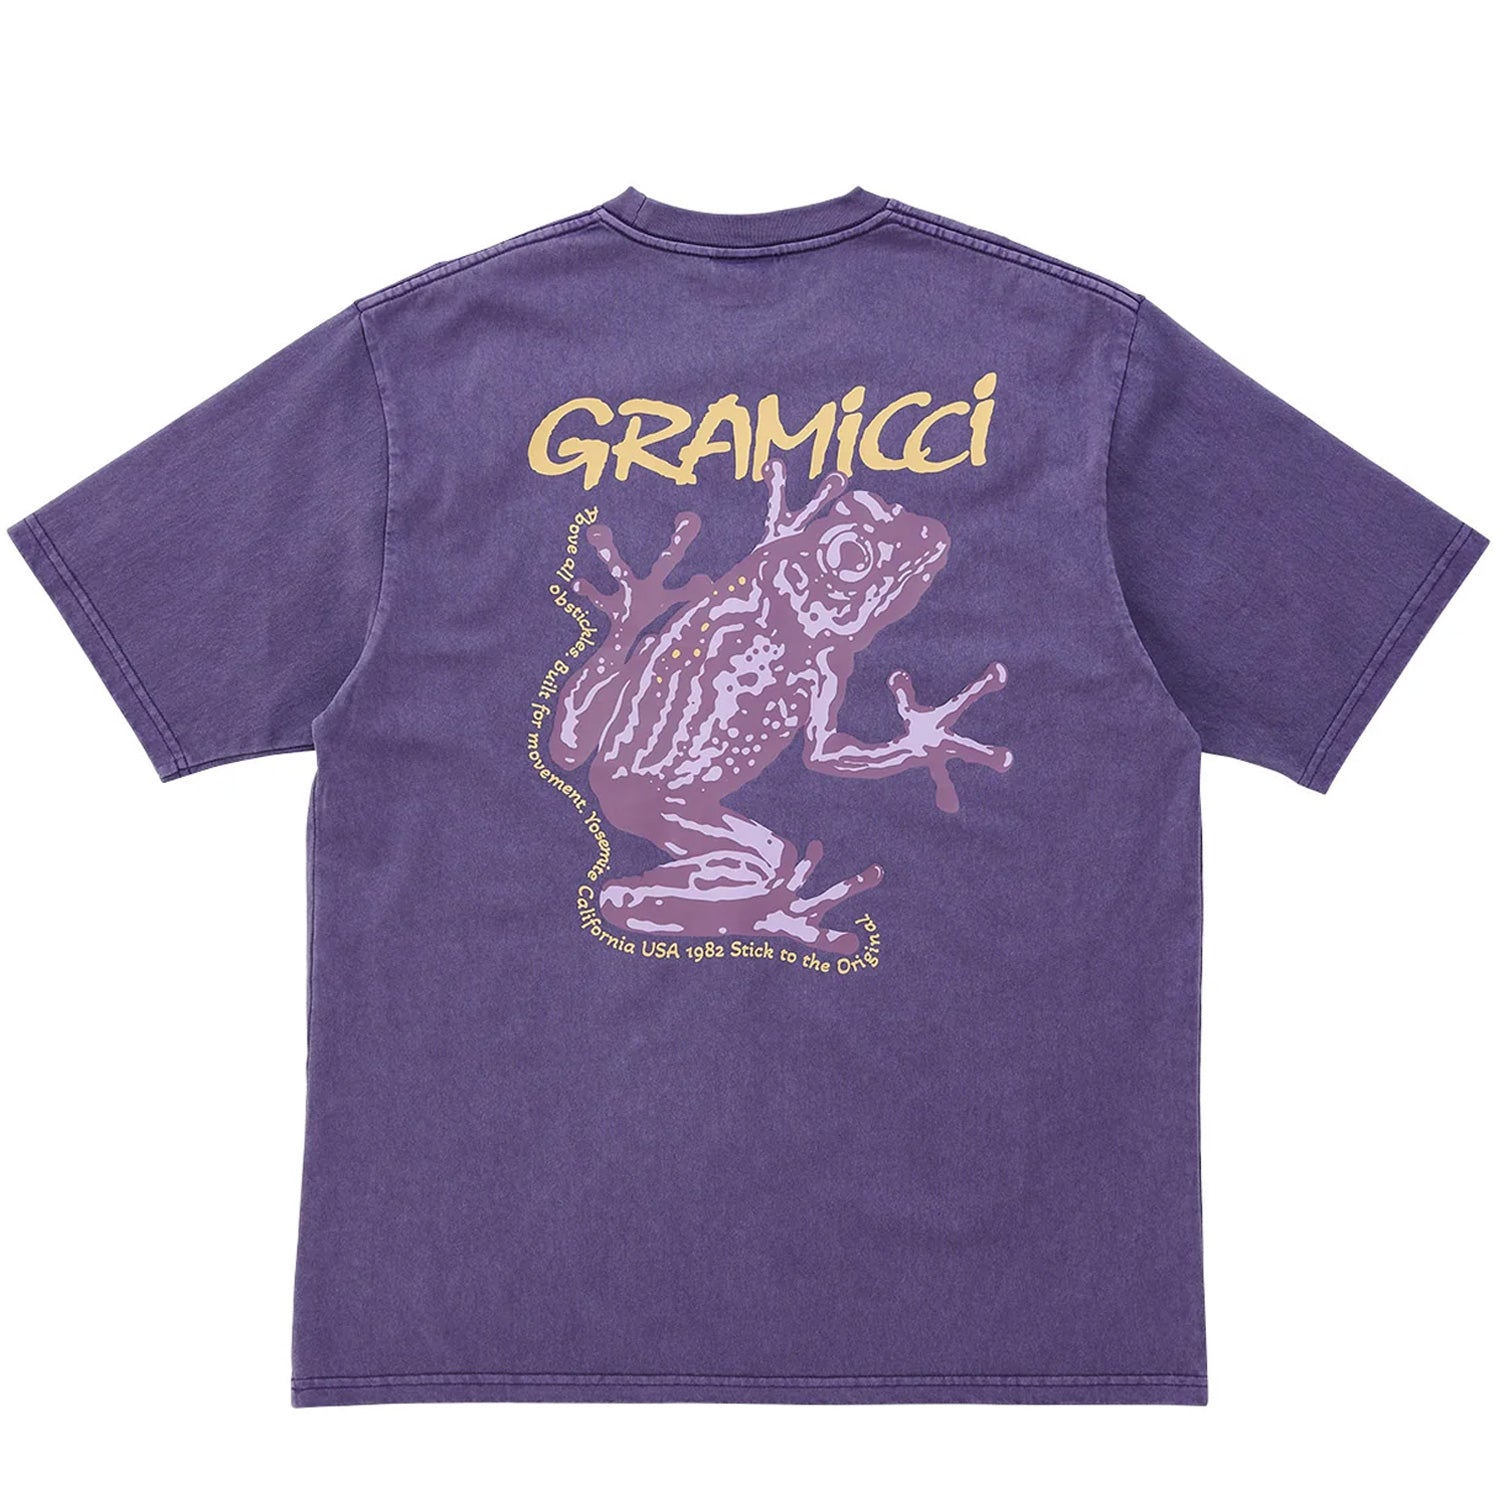 Purple gramicci short sleeve t-shirt with printed frog logo in purple and yellow on front and back. Free UK Shipping on orders over £50